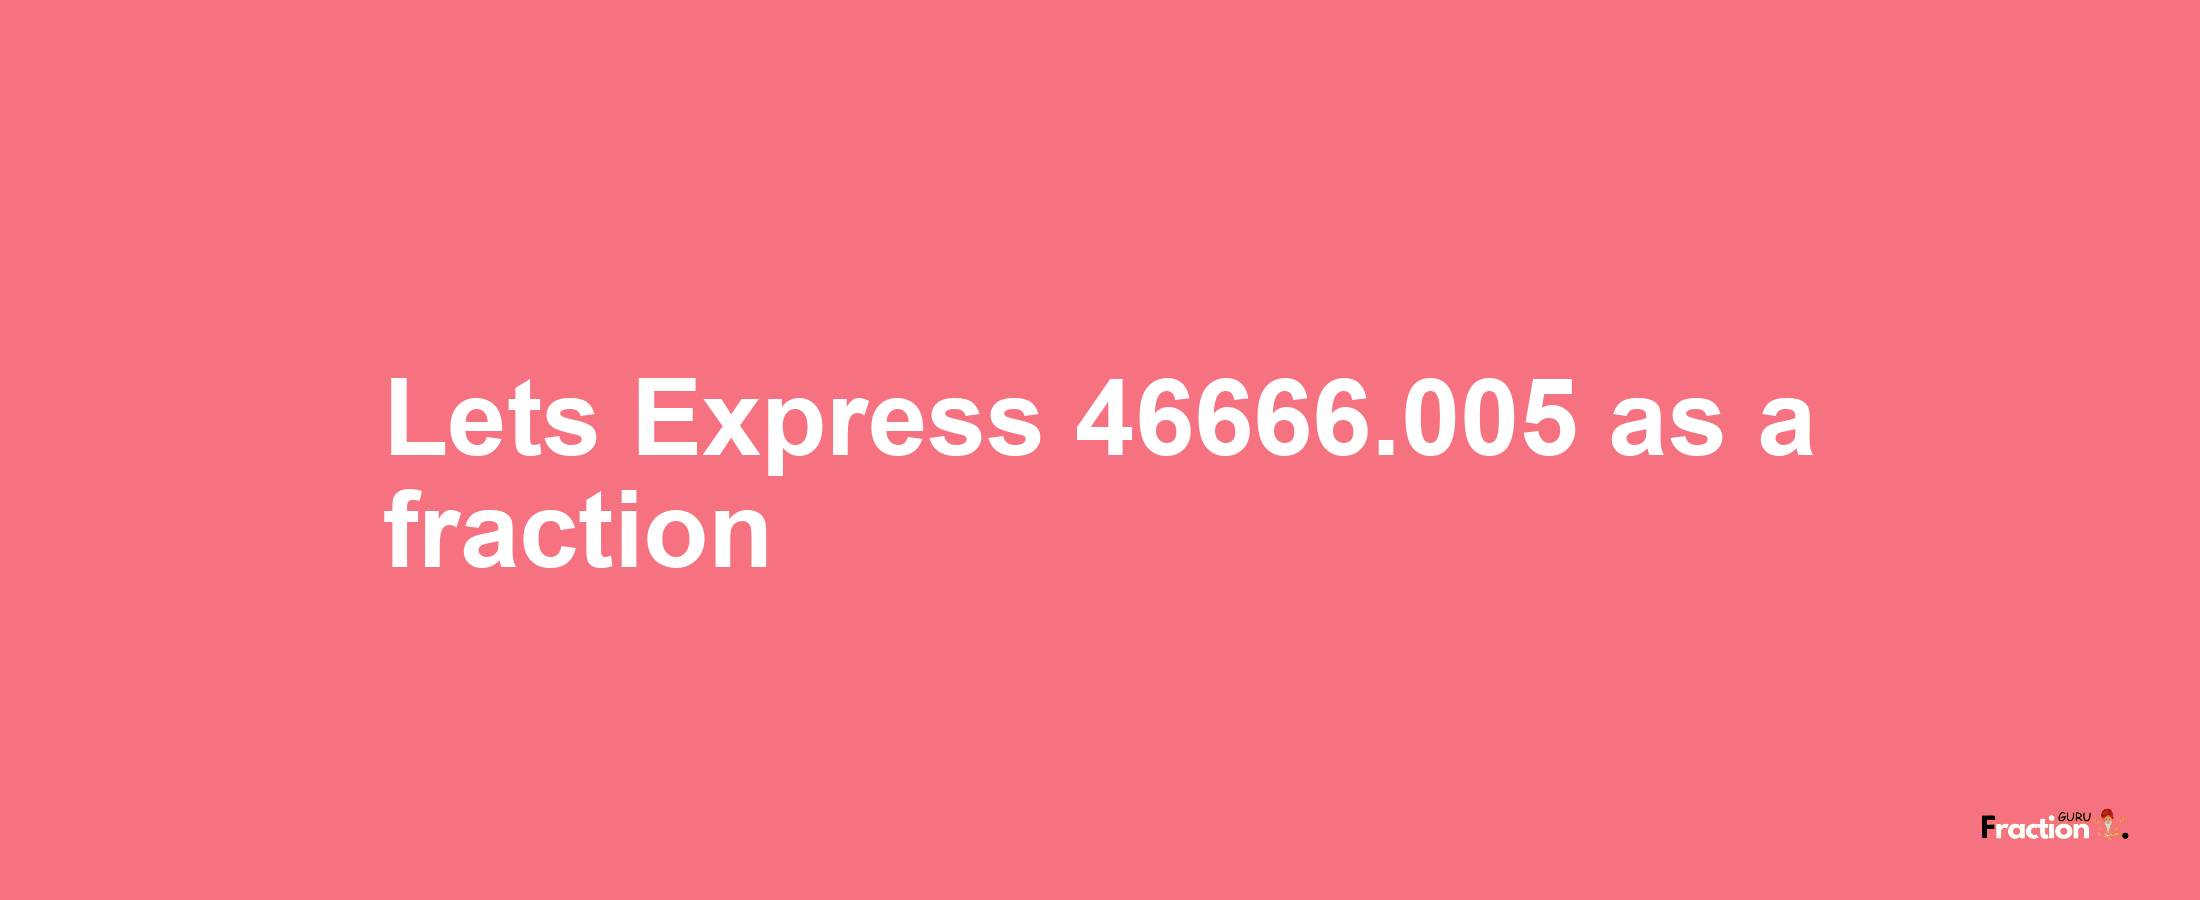 Lets Express 46666.005 as afraction